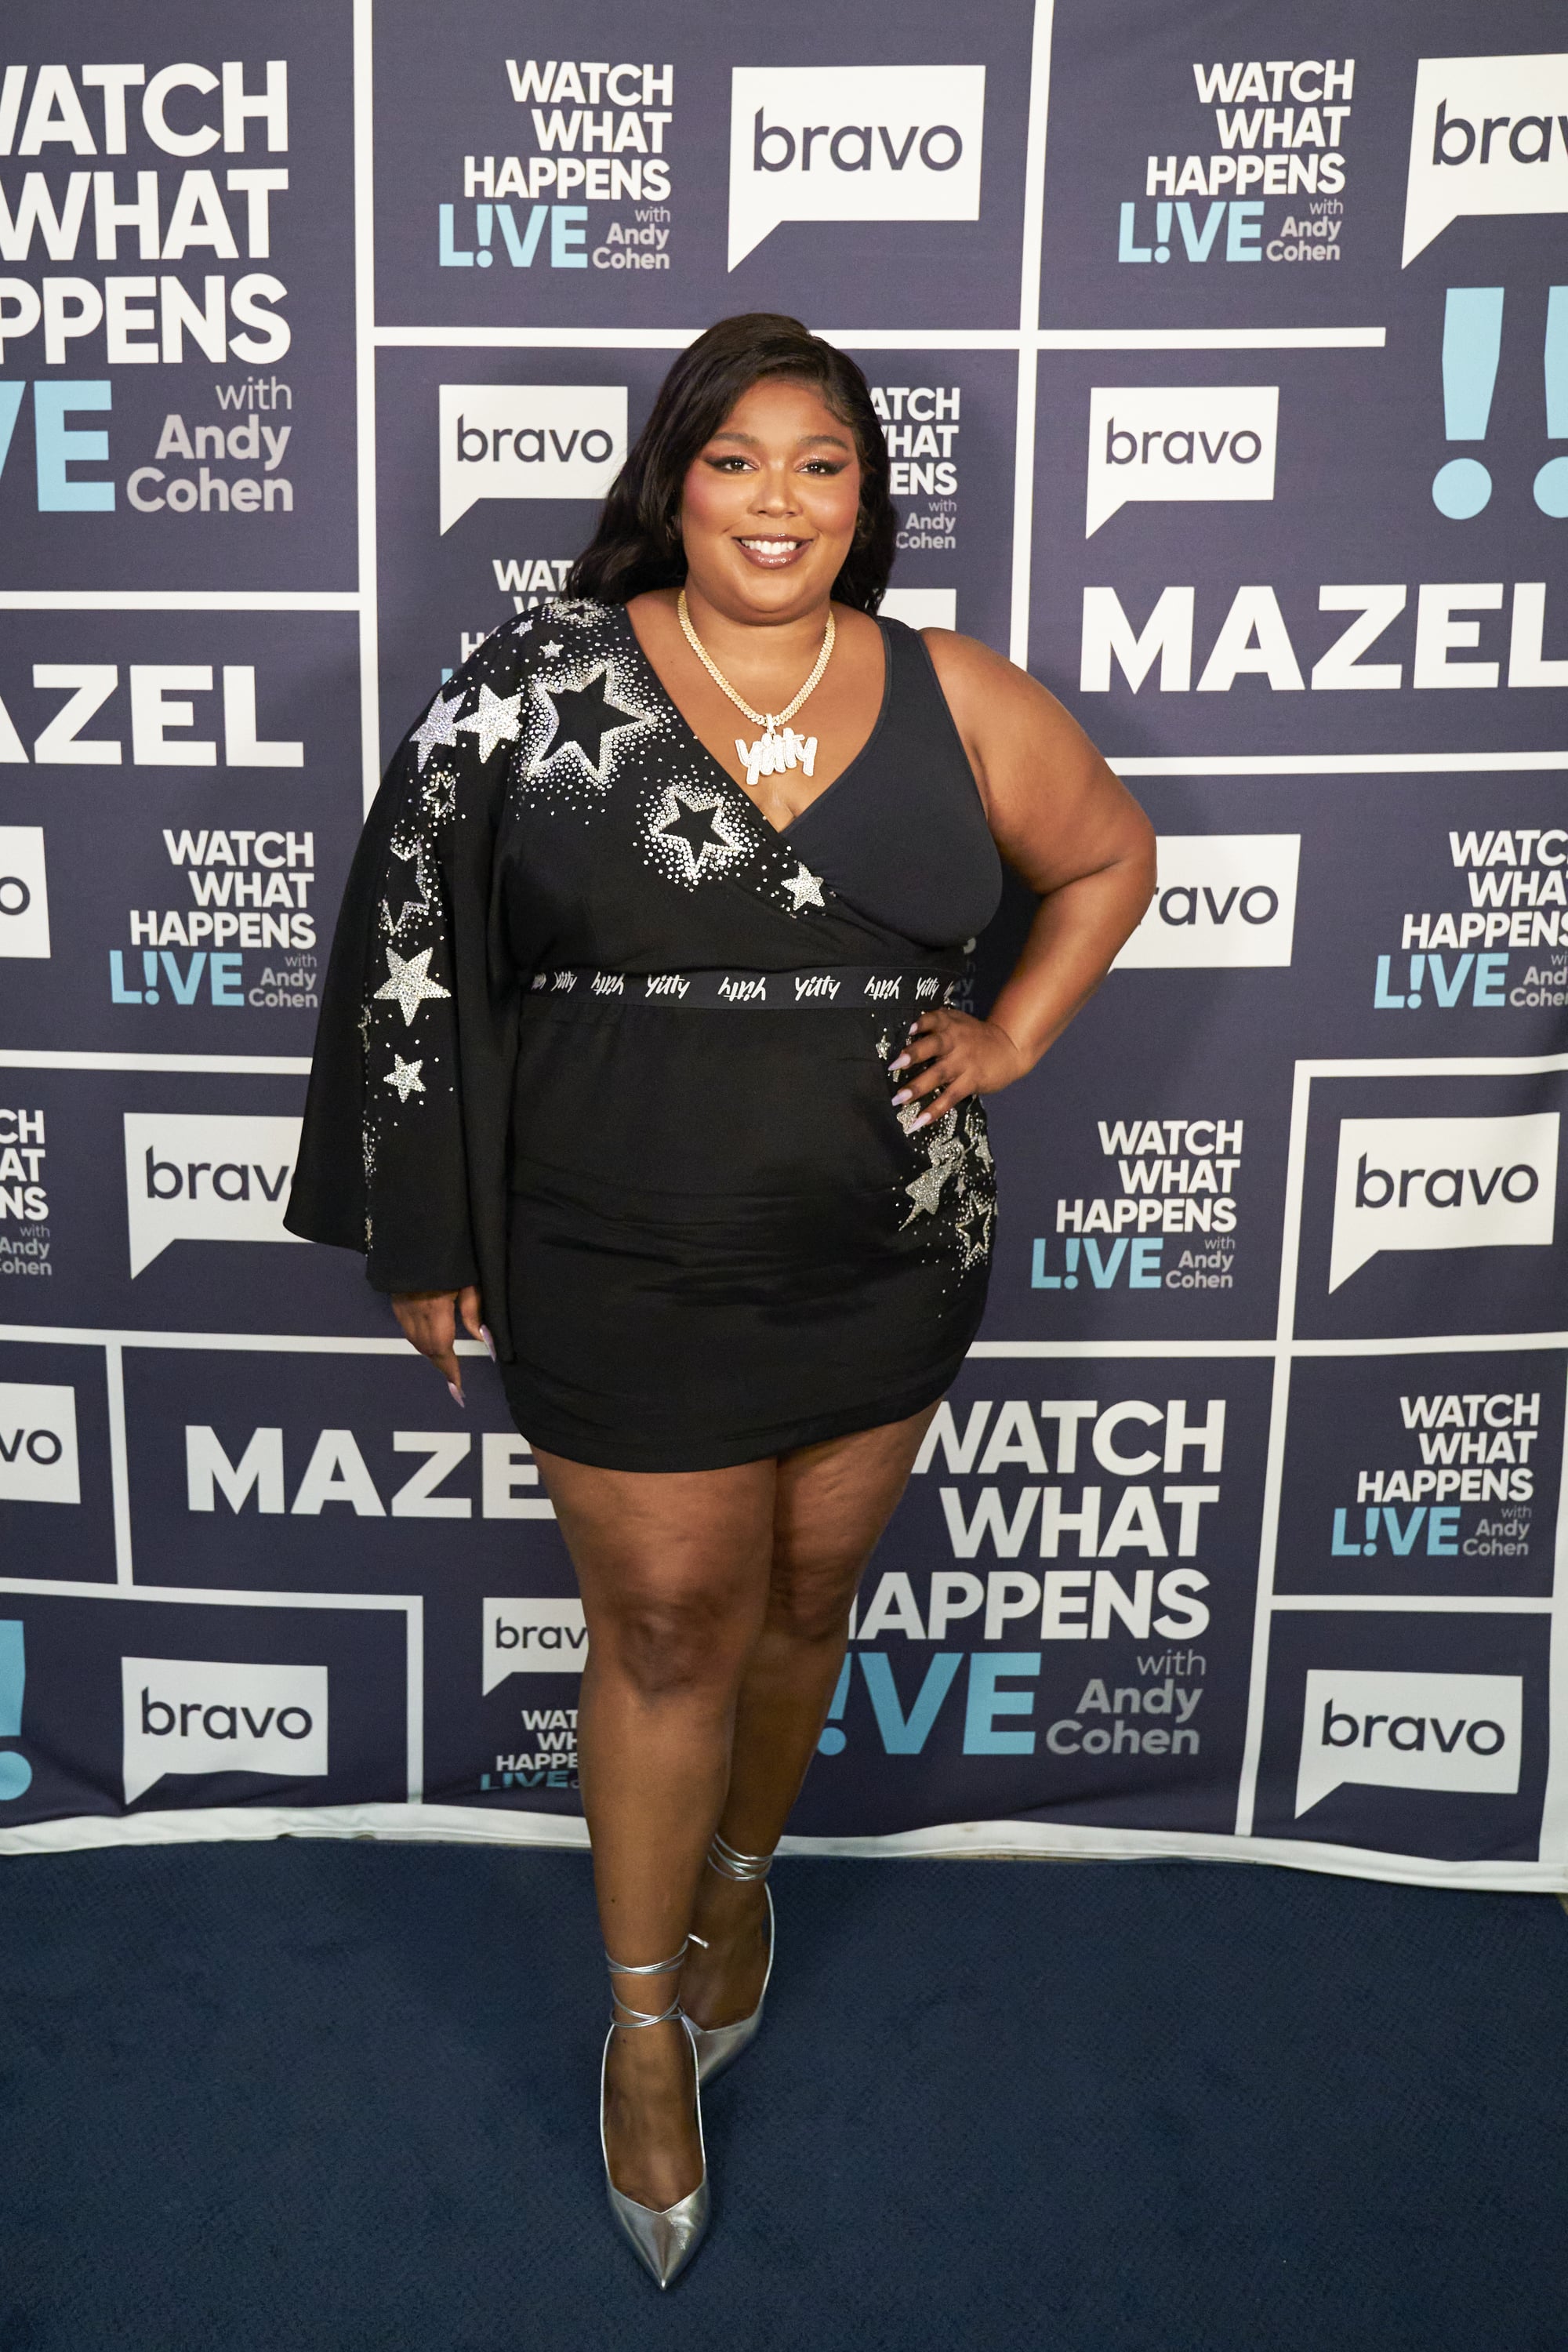 WATCH WHAT HAPPENS LIVE WITH ANDY COHEN -- Episode 19118 -- Pictured: Lizzo -- (Photo by: Michael Greenberg/Bravo via Getty Images)